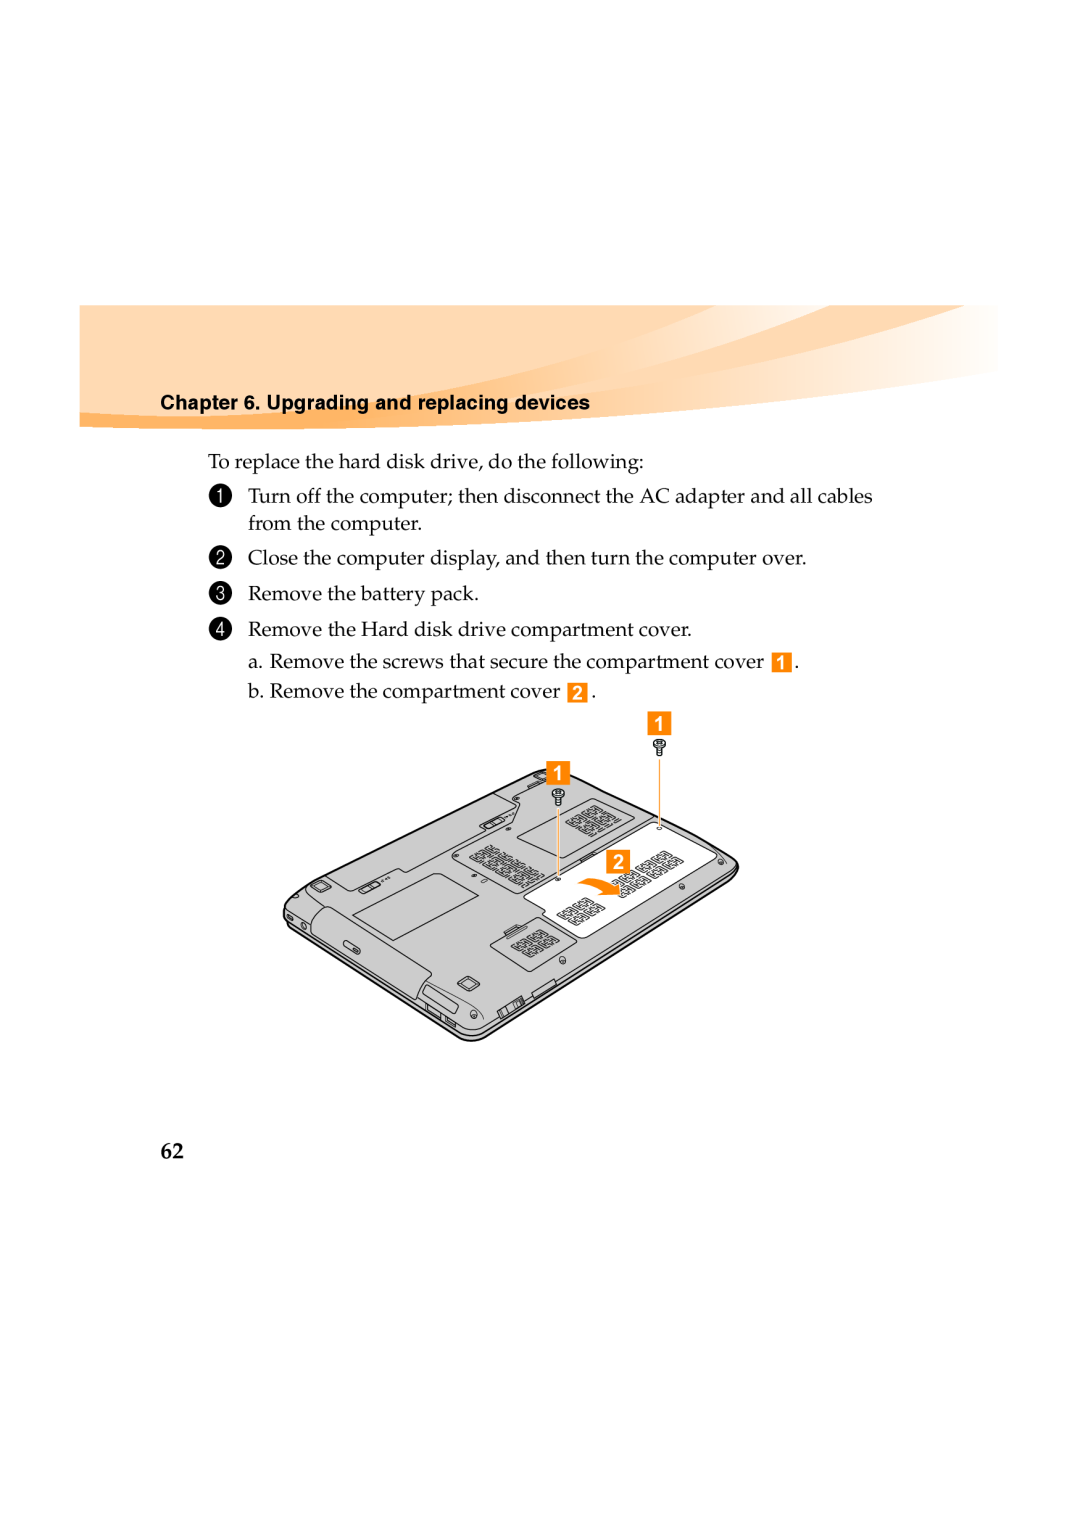 Lenovo Y460 Upgrading and replacing devices, To replace the hard disk drive, do the following, Remove the battery pack 